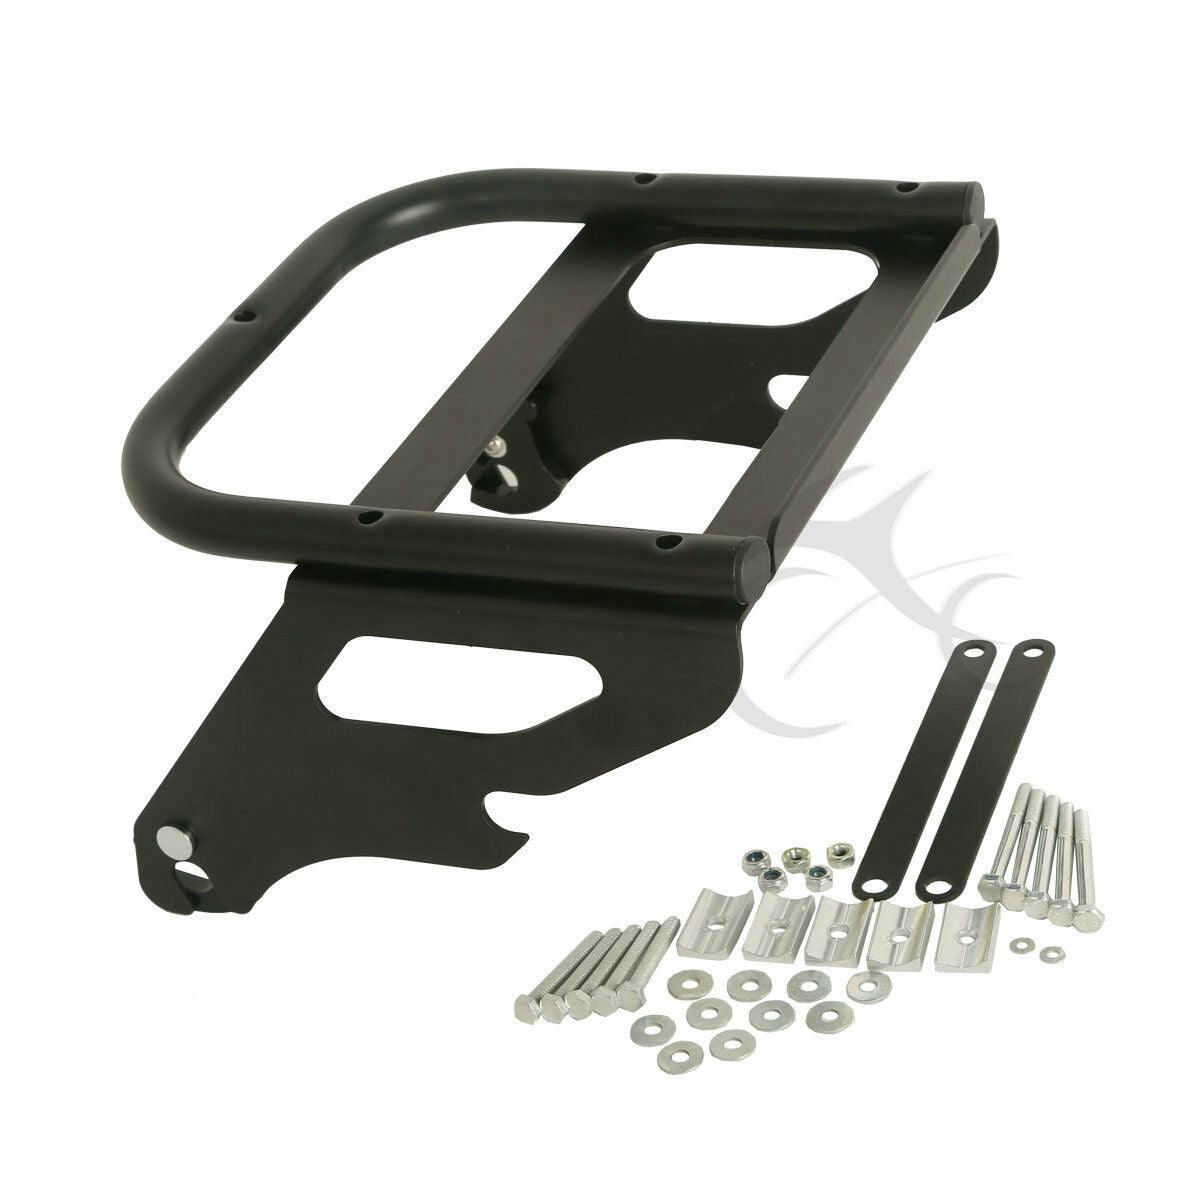 Detachable Solo Luggage Rack Fit For Harley Tour Pak Touring Road King 97-08 - Moto Life Products